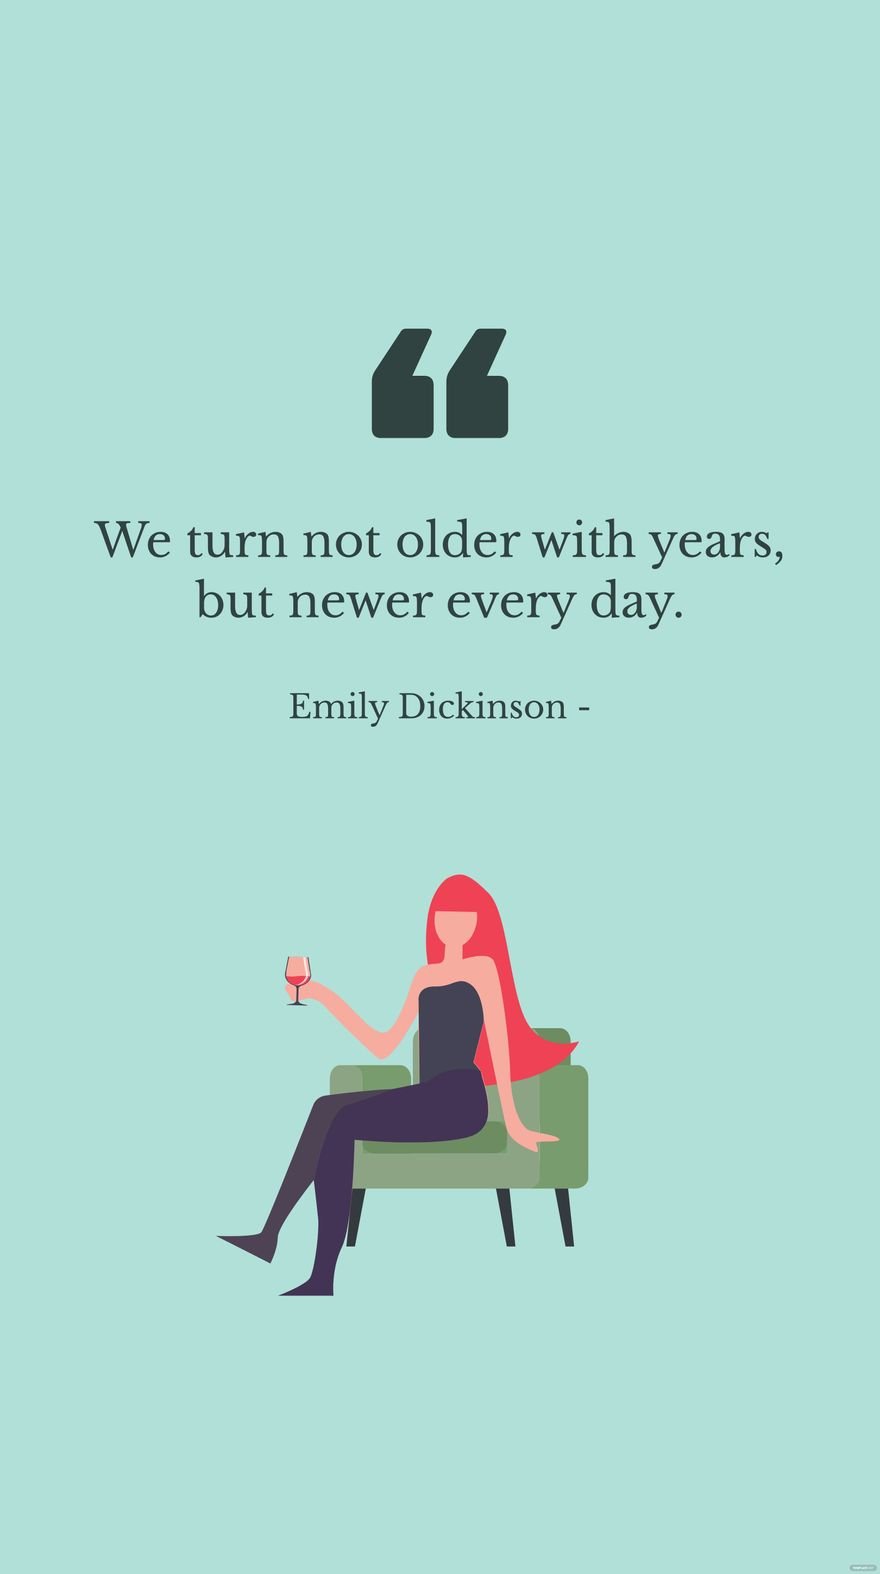 Free Emily Dickinson - We turn not older with years, but newer every day. in JPG